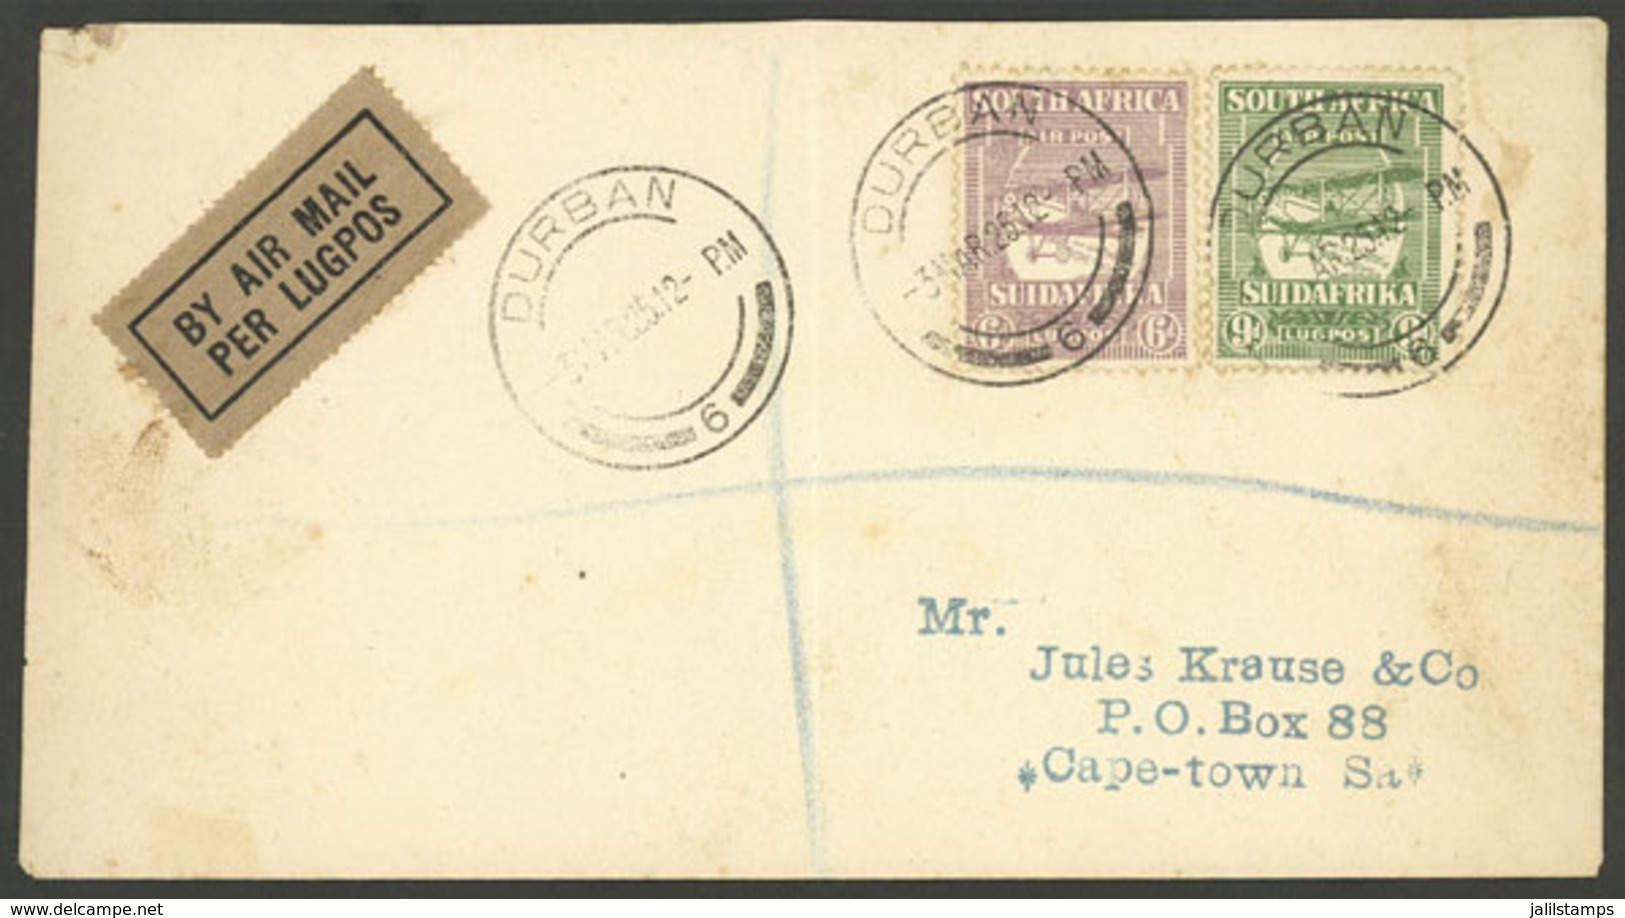 SOUTH AFRICA: 3/MAR/1925 Durban - Cape Town, First Flight, Cover Franked By Sc.CC3 + C4, Arrival Backstamp, Very Nice! - Sin Clasificación